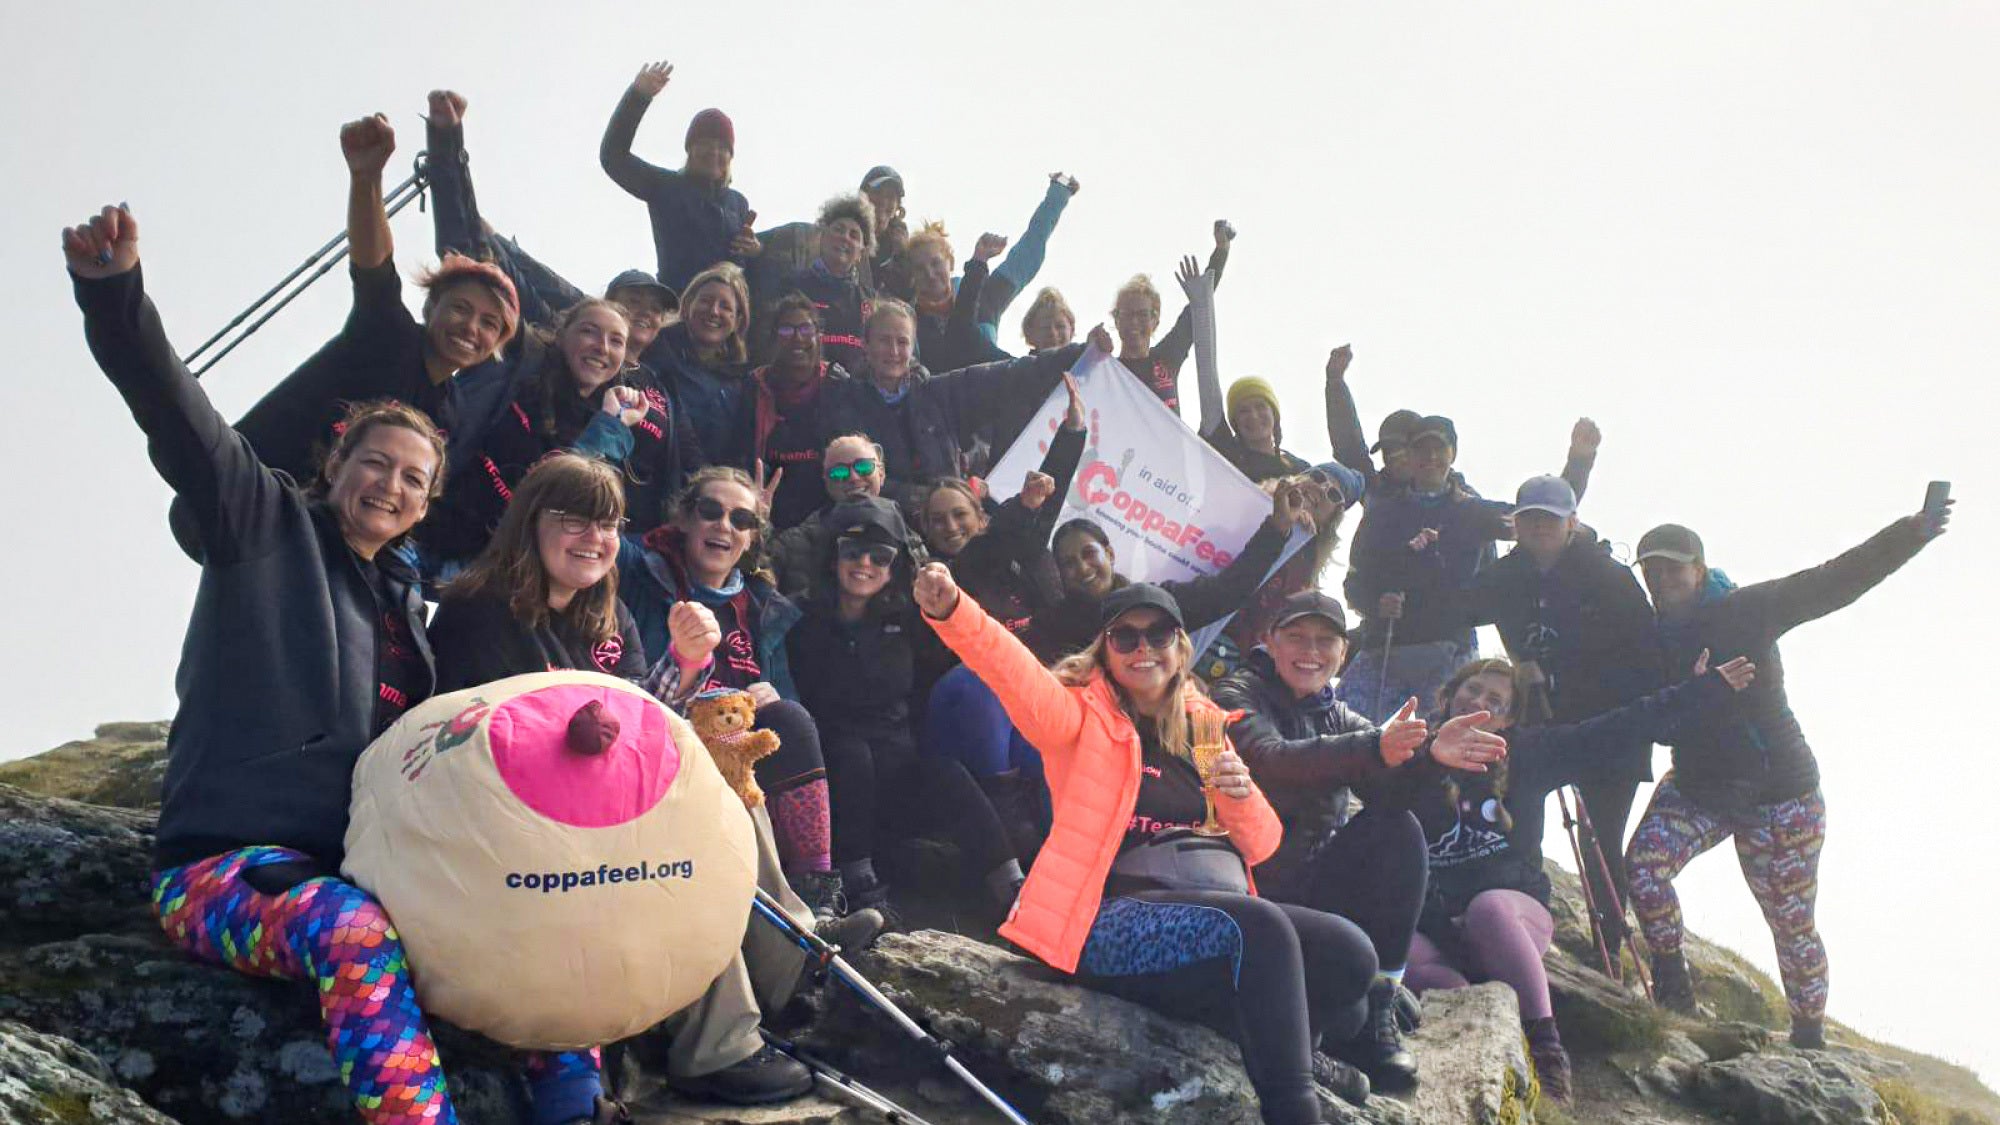 Photo showing a group of hikers holding their arms aloft while sat on a mountain top.